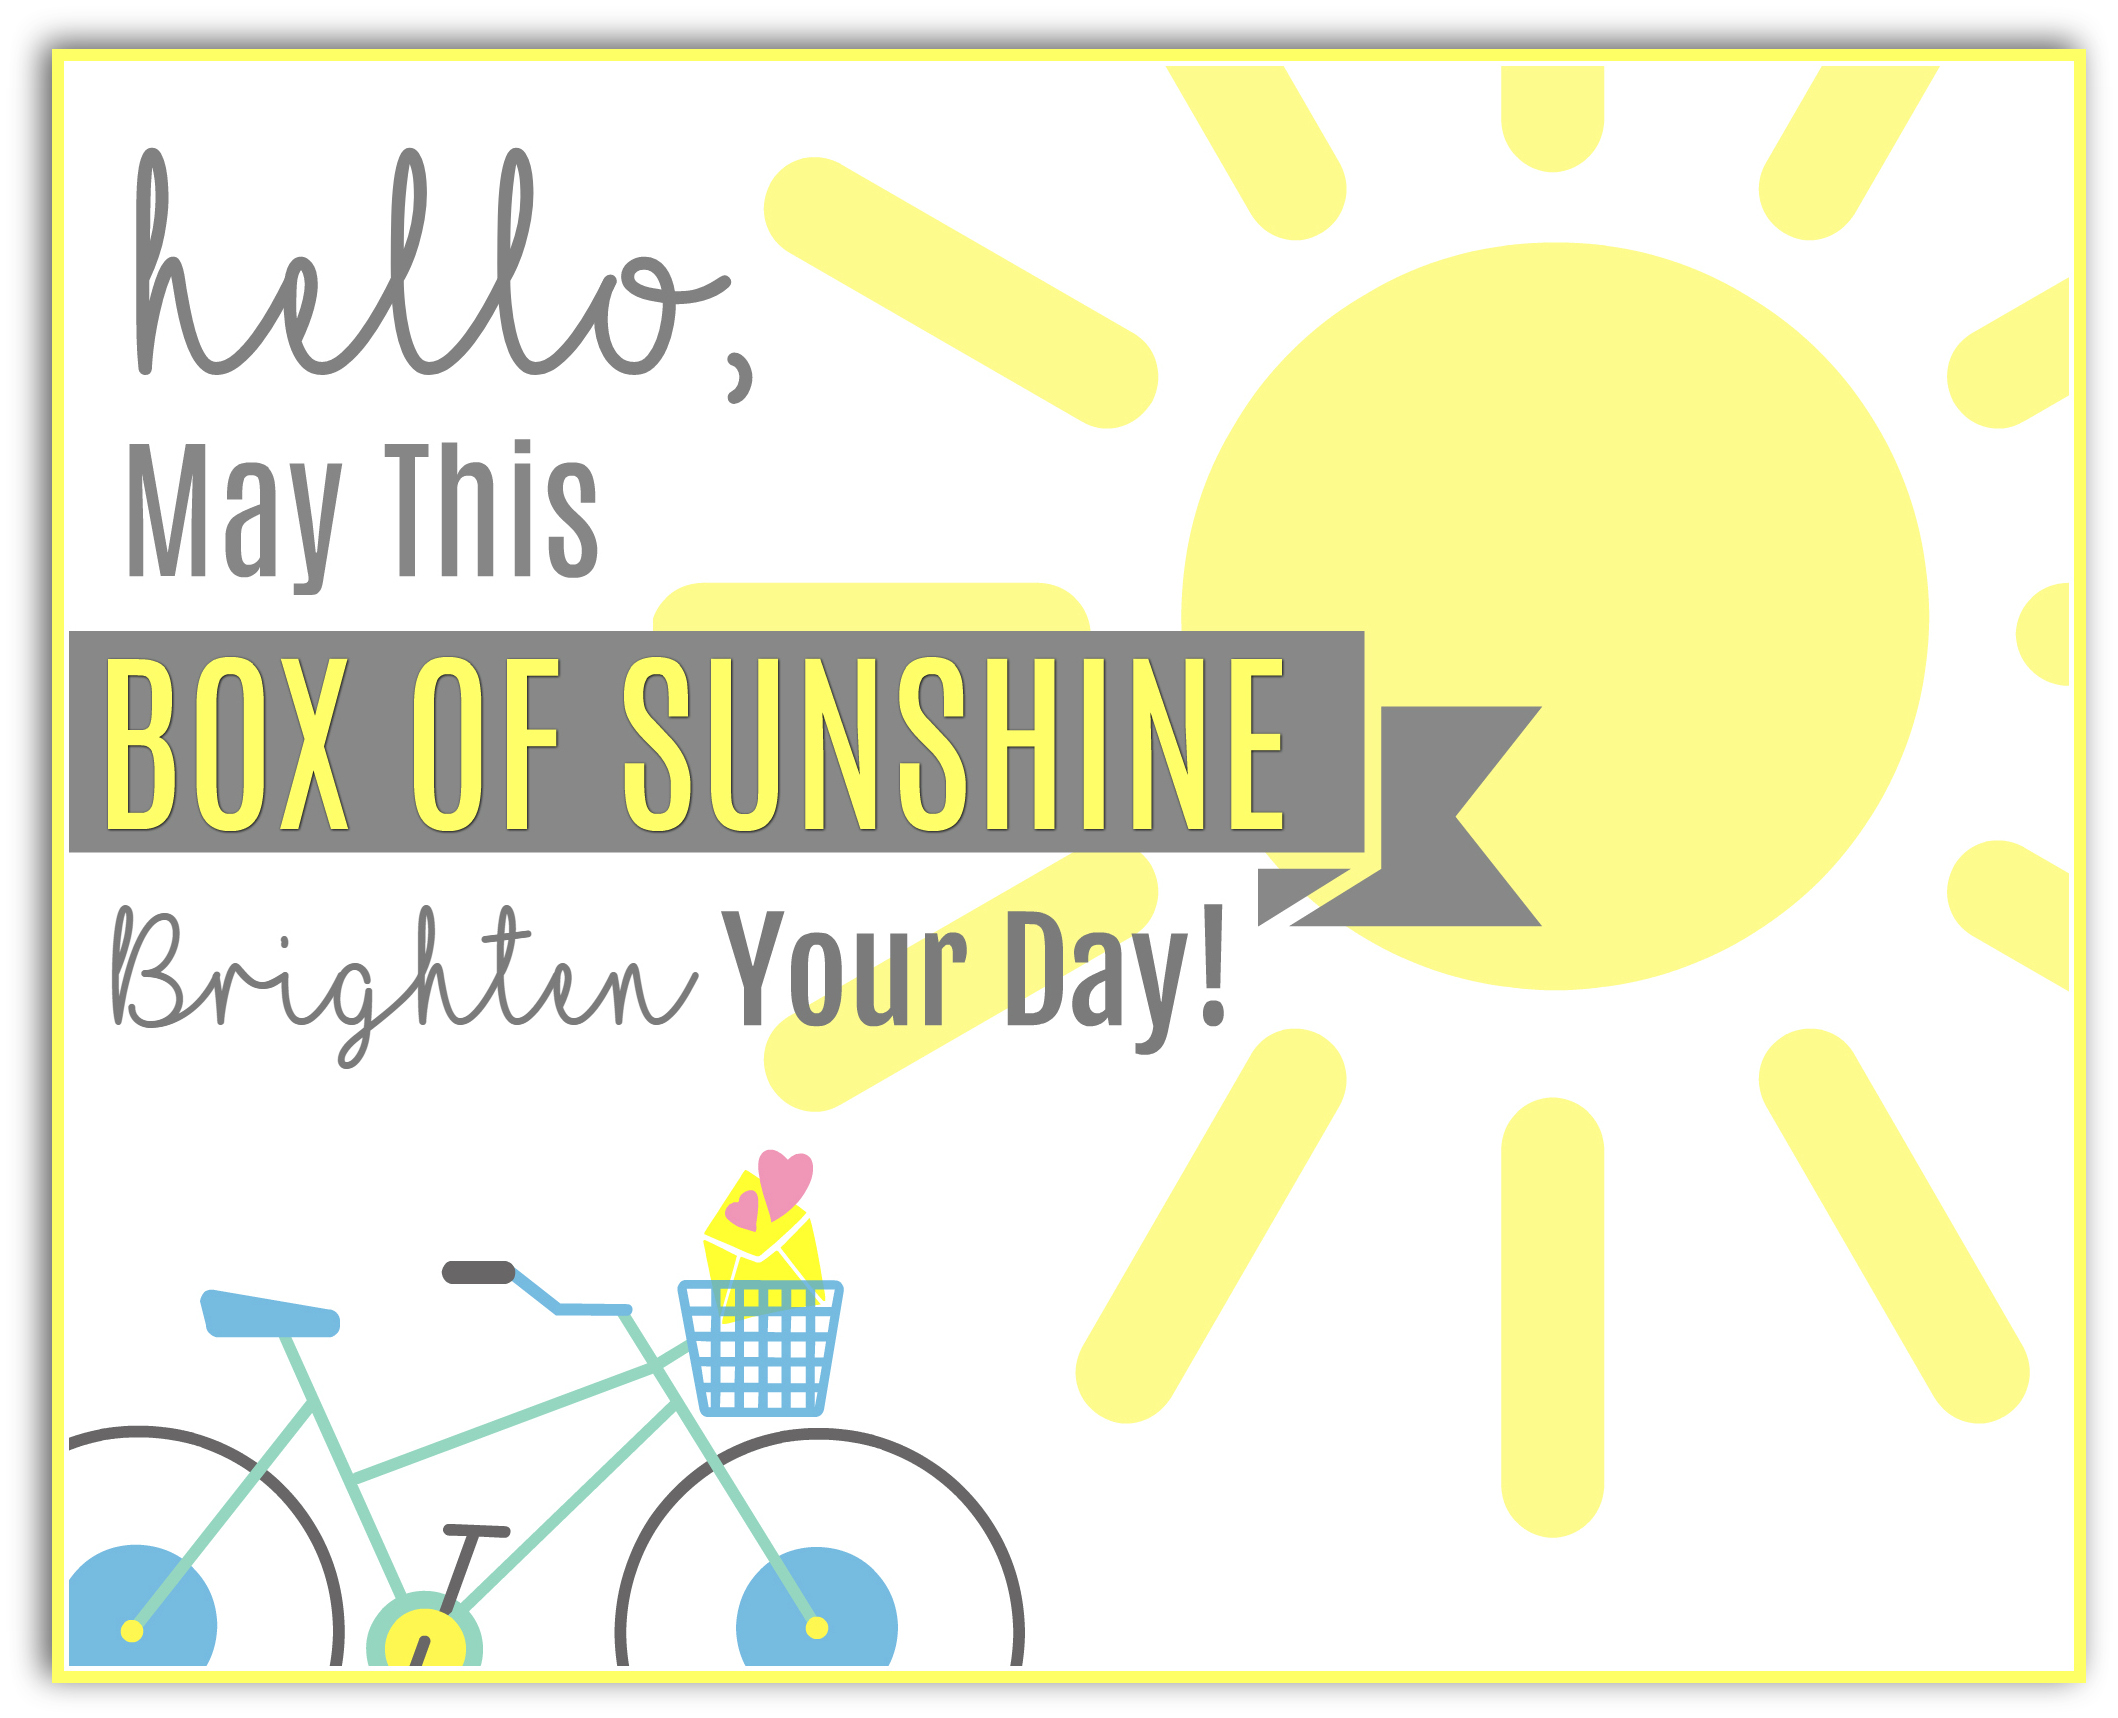 Brighten Someone's Day with a Box of Sunshine Hip2Save